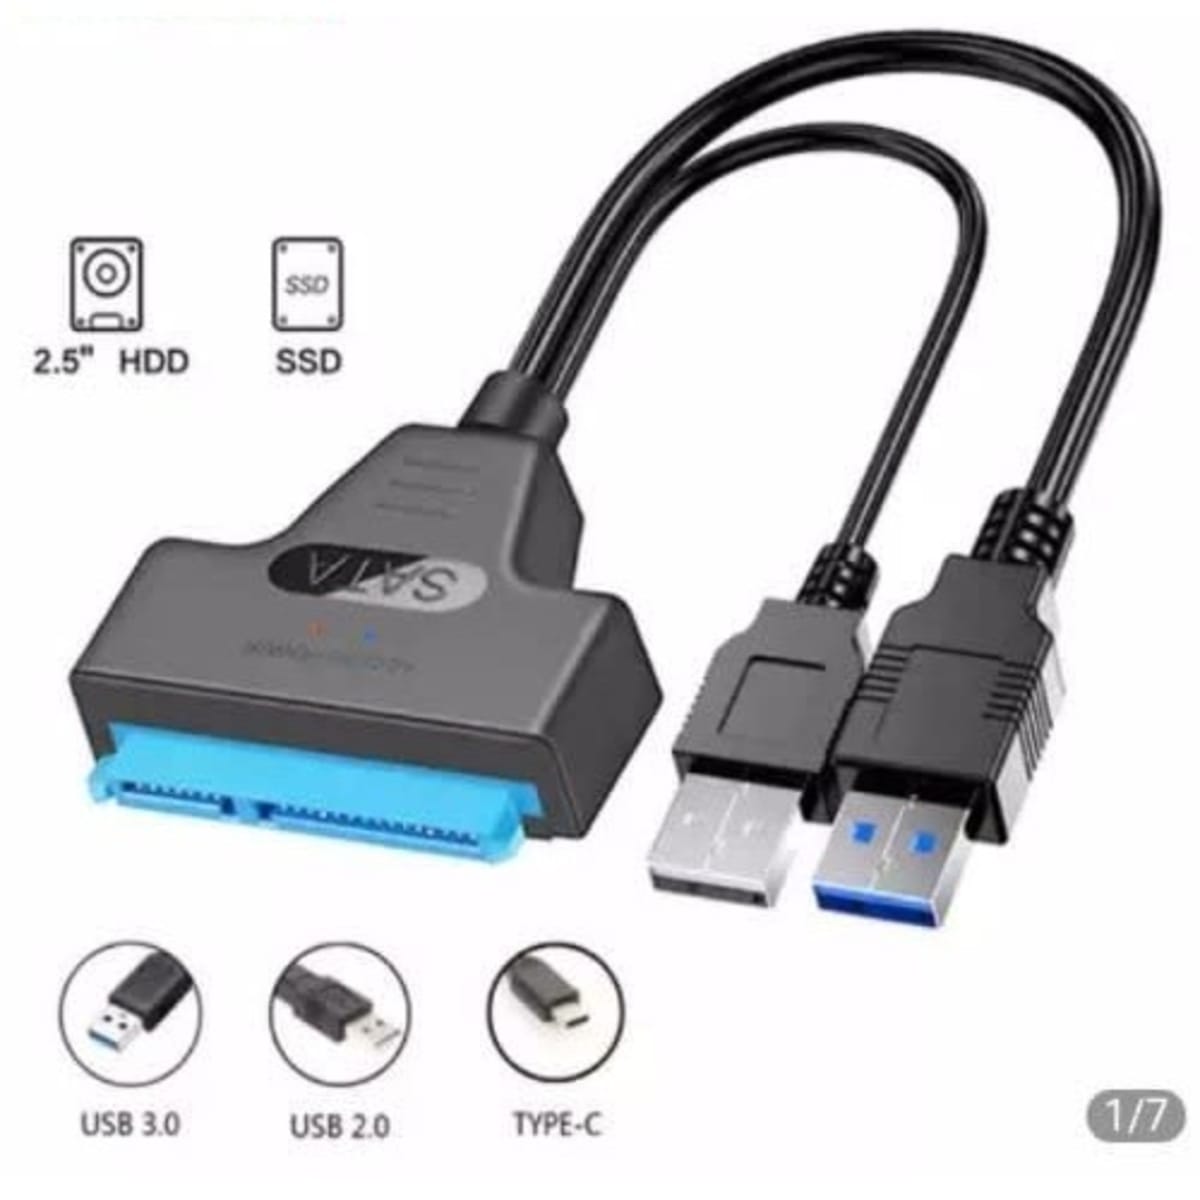 Usb Cable Sata 3 To Usb 3.0 Adapter Computer Cables Connectors | Konga  Online Shopping